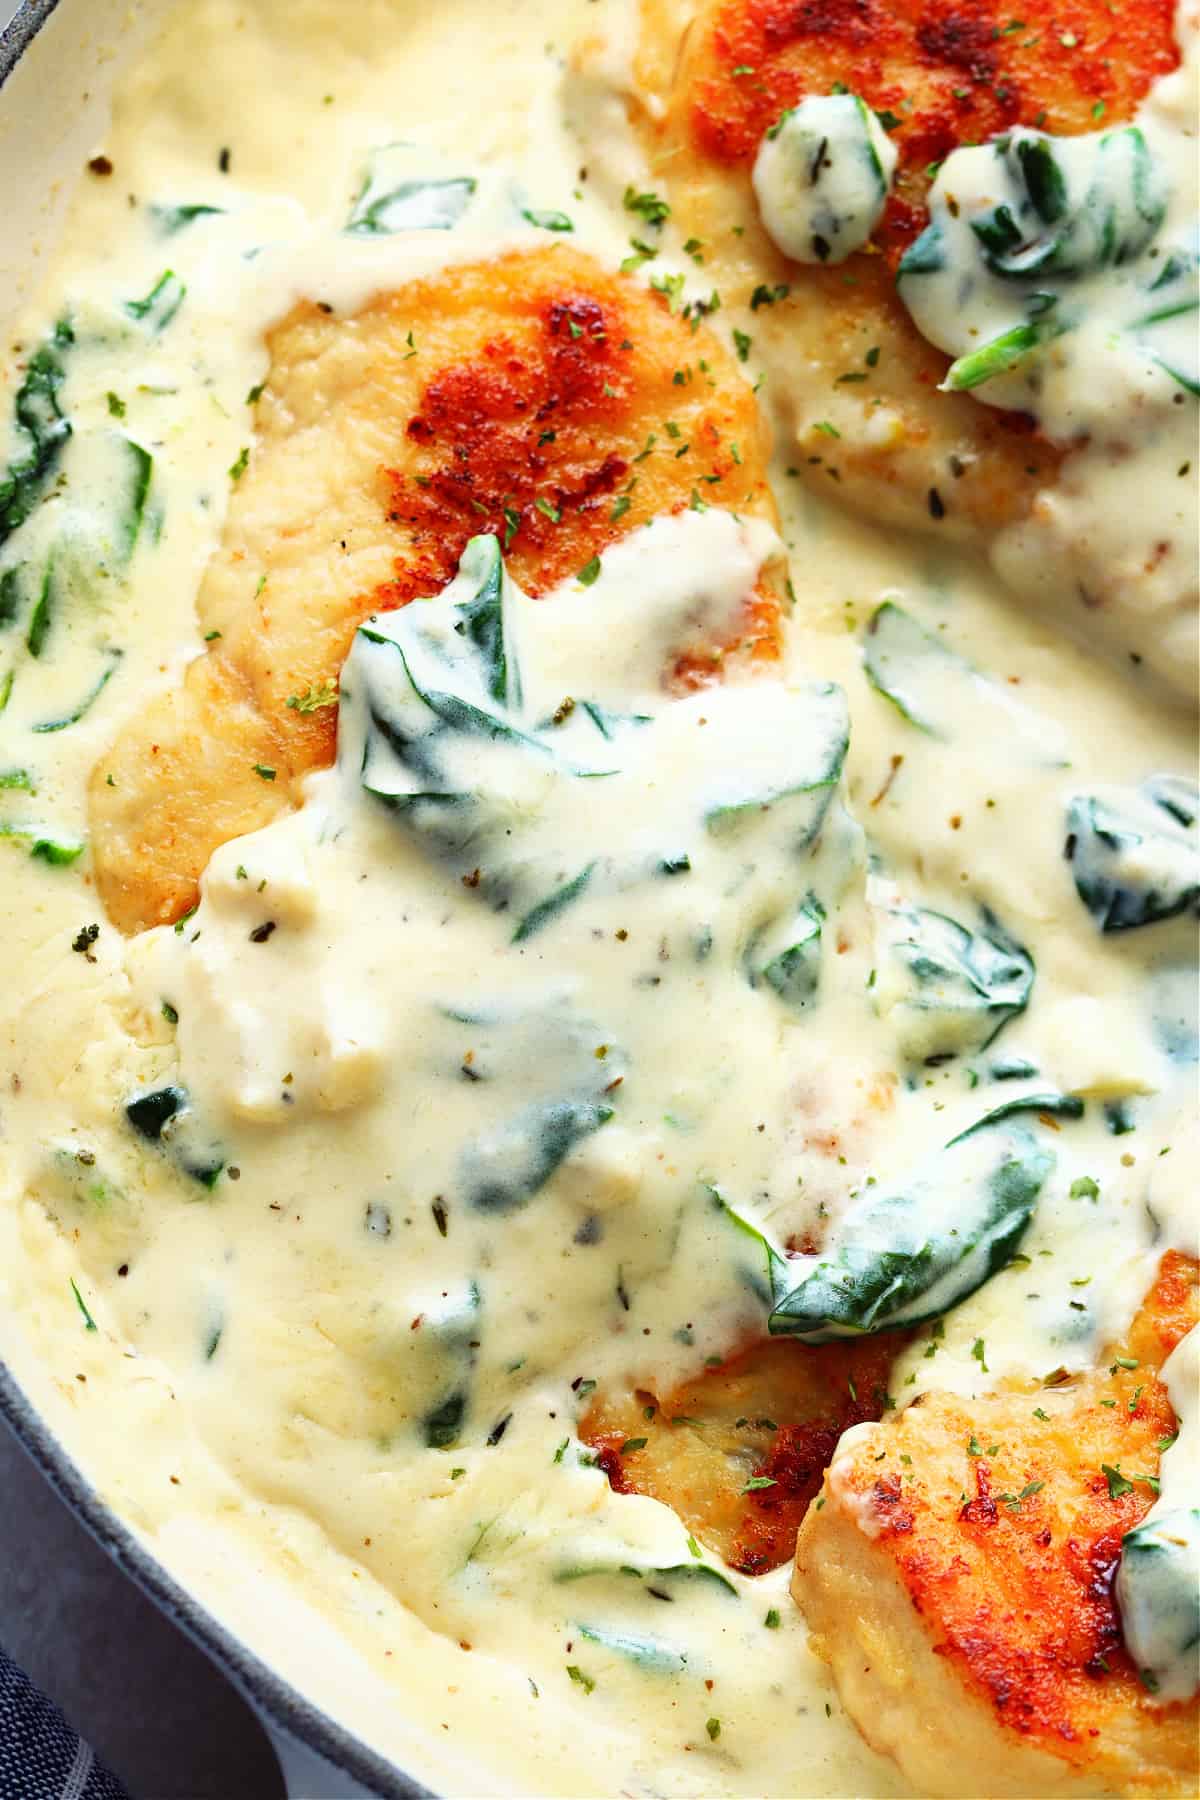 Cooked chicken breast in a creamy sauce with spinach in a pan.